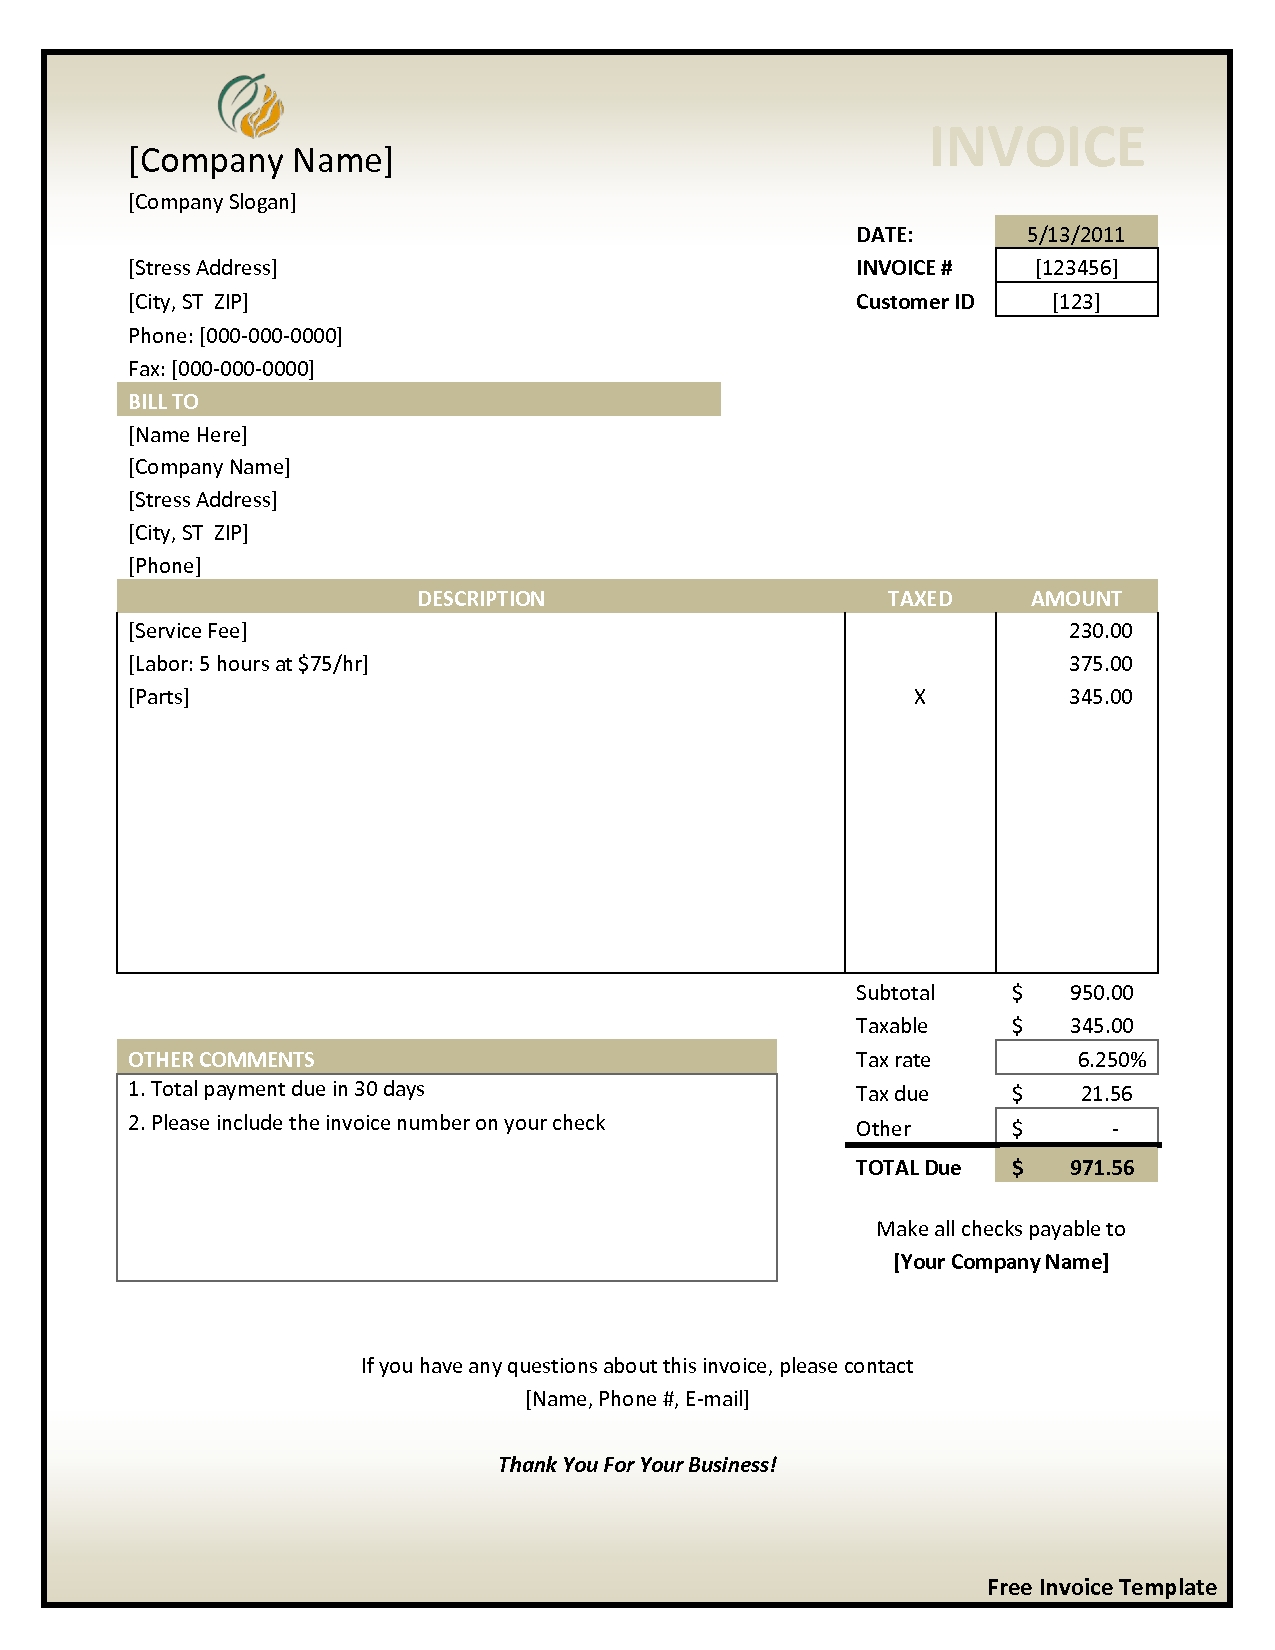 11 invoice template word download free top invoice templates free invoice templates